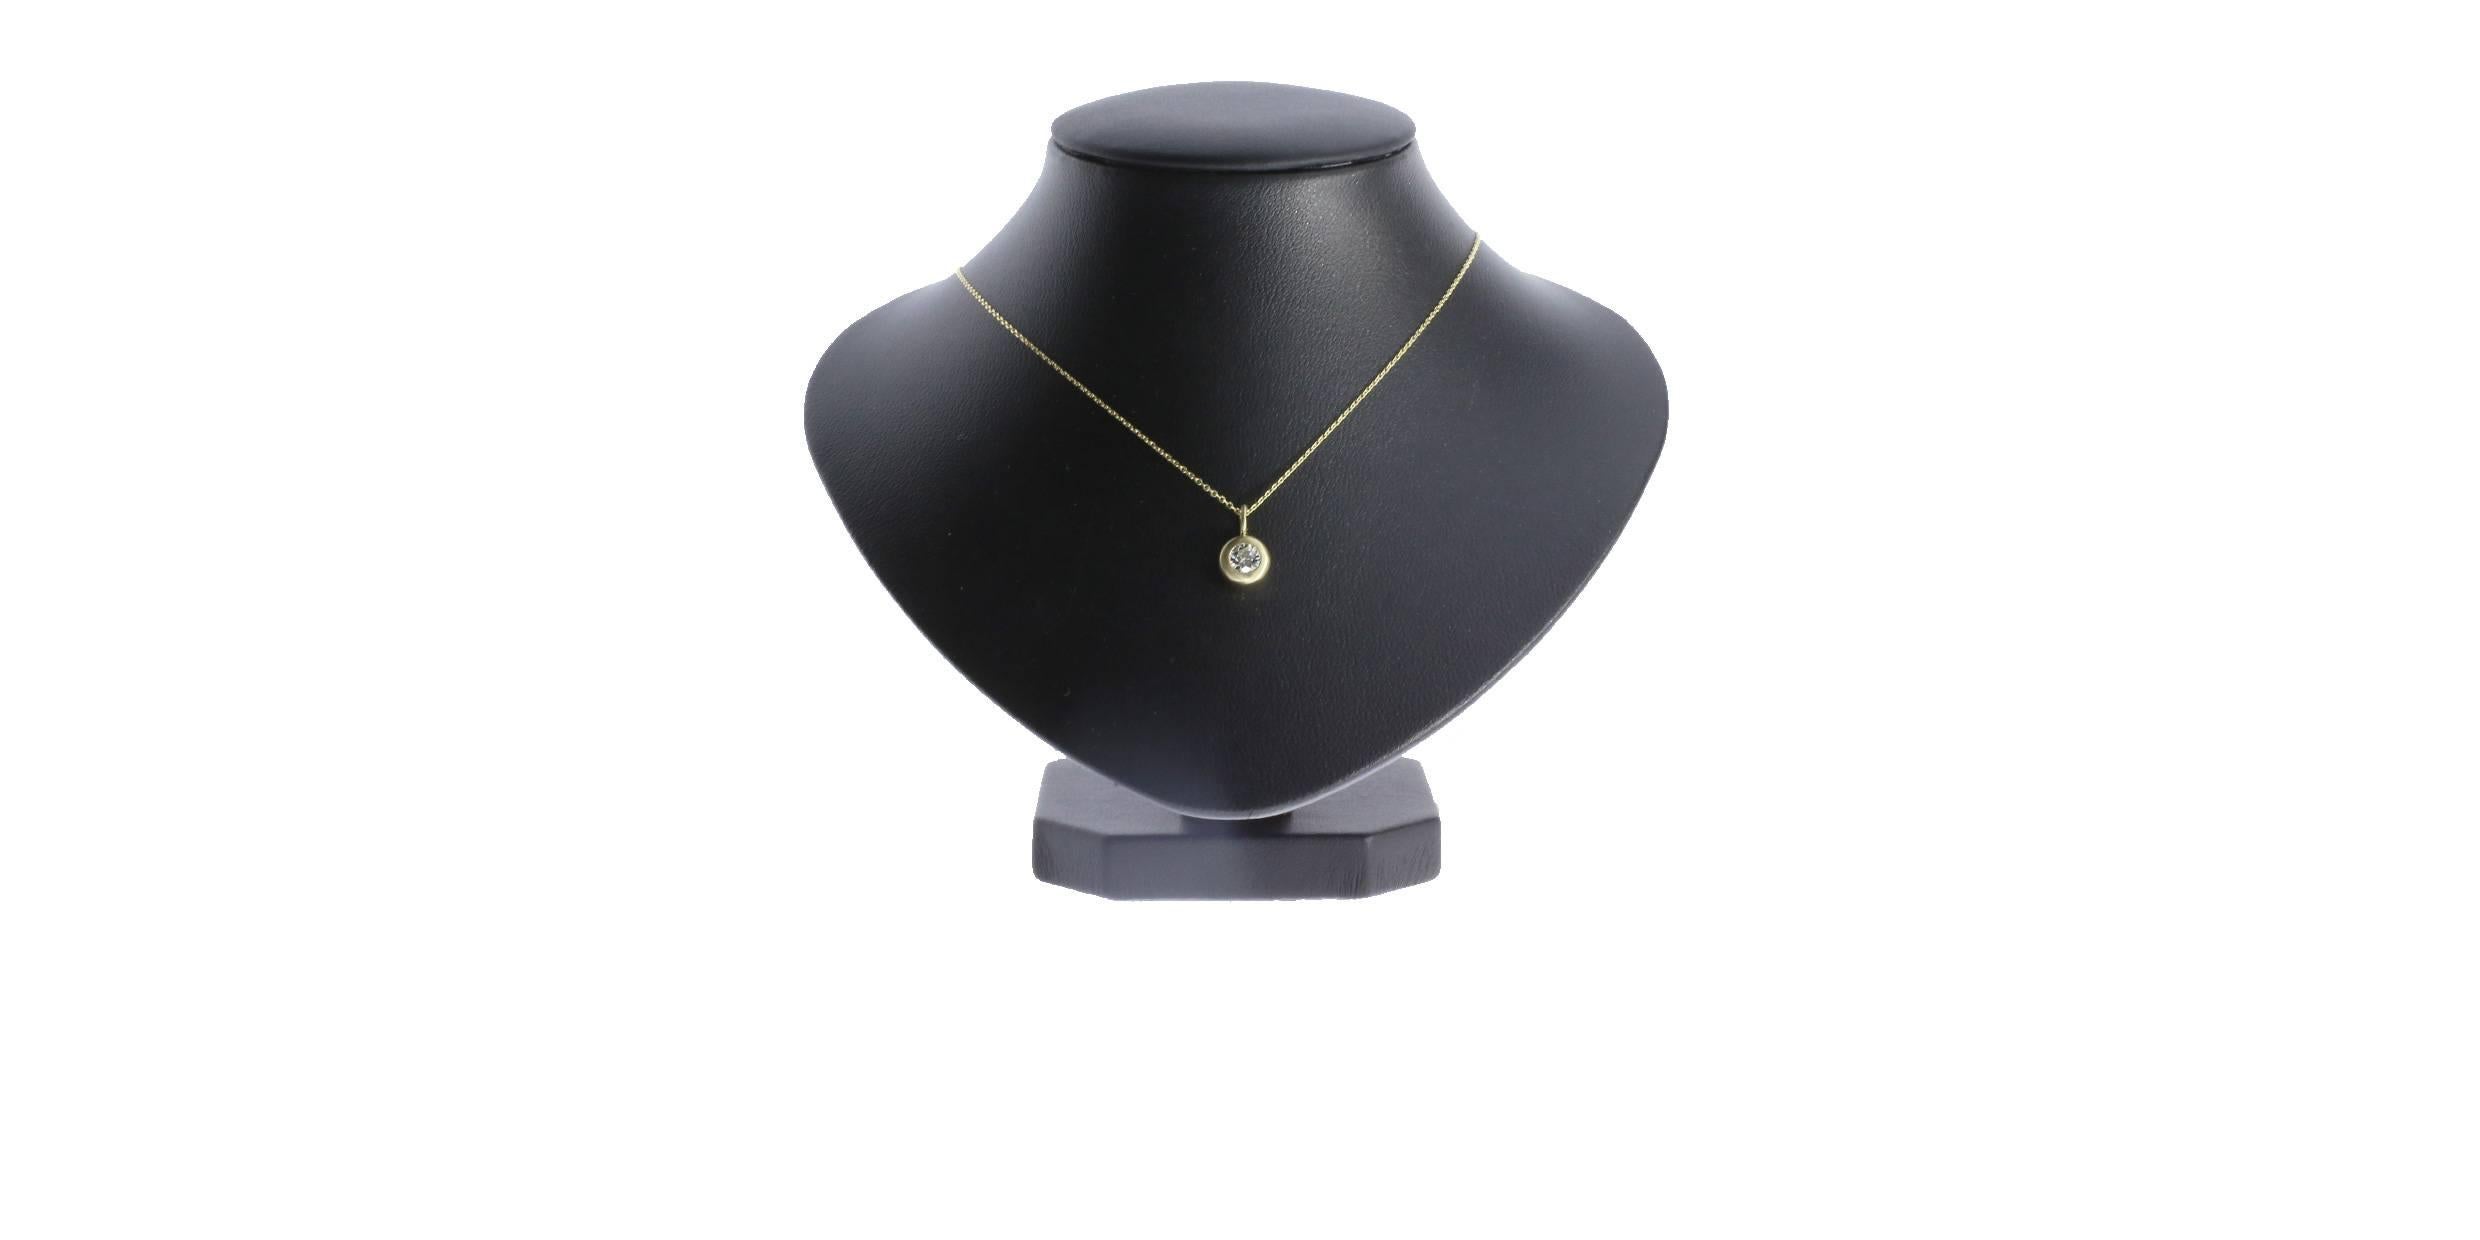 This pendant features a 0.30 carat I/SI1 round diamond bezel set in a 14k yellow gold pendant.  The pendant features a striking brush finish, creating a stunning contrast. The pendant measures 12mm in length including the bail.  It is suspended from